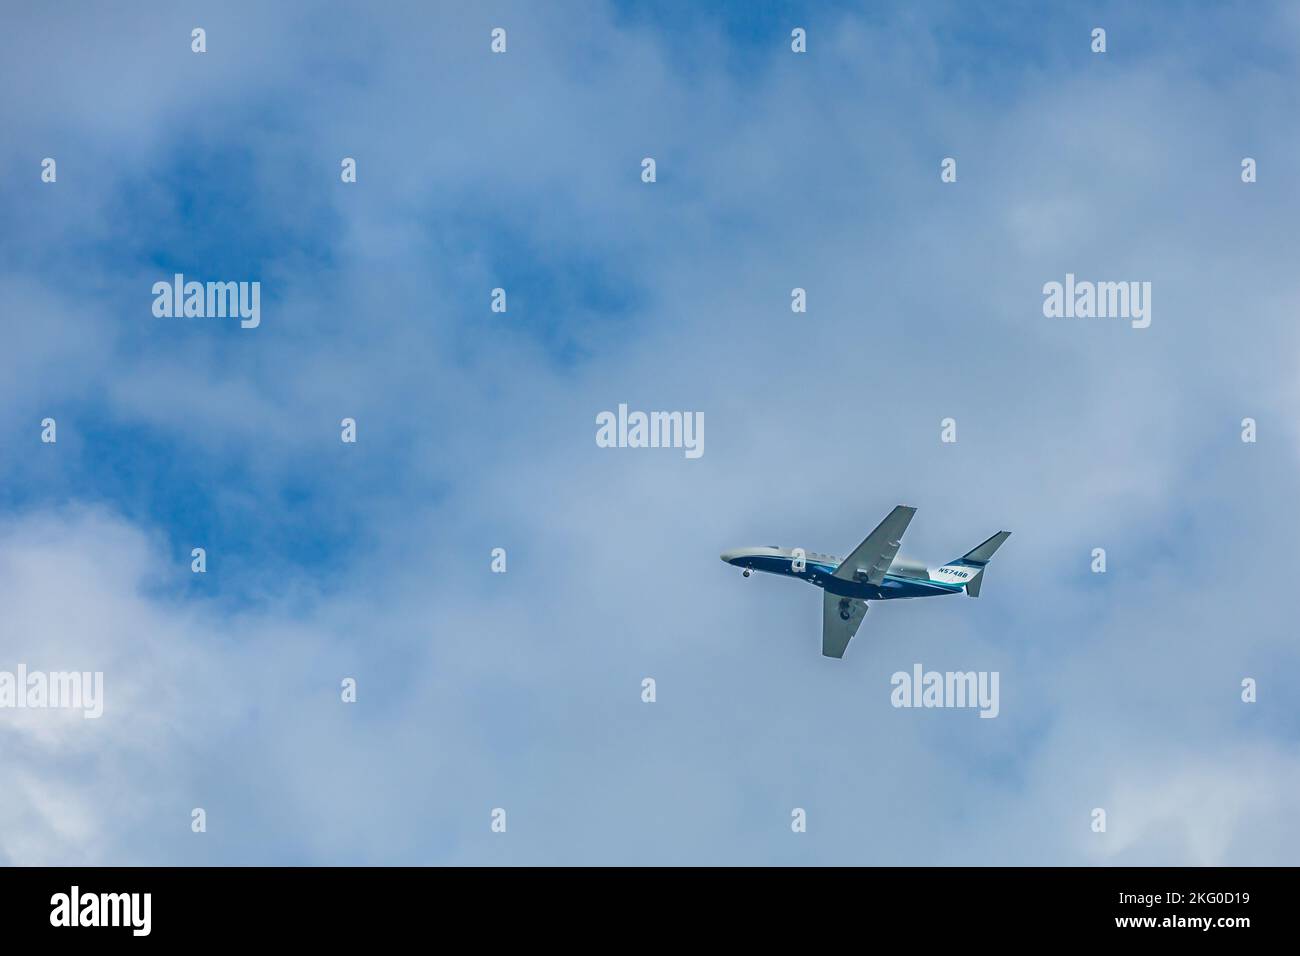 A blue and white 2010 Cessna 525c commuter plane in flies overhead. Stock Photo